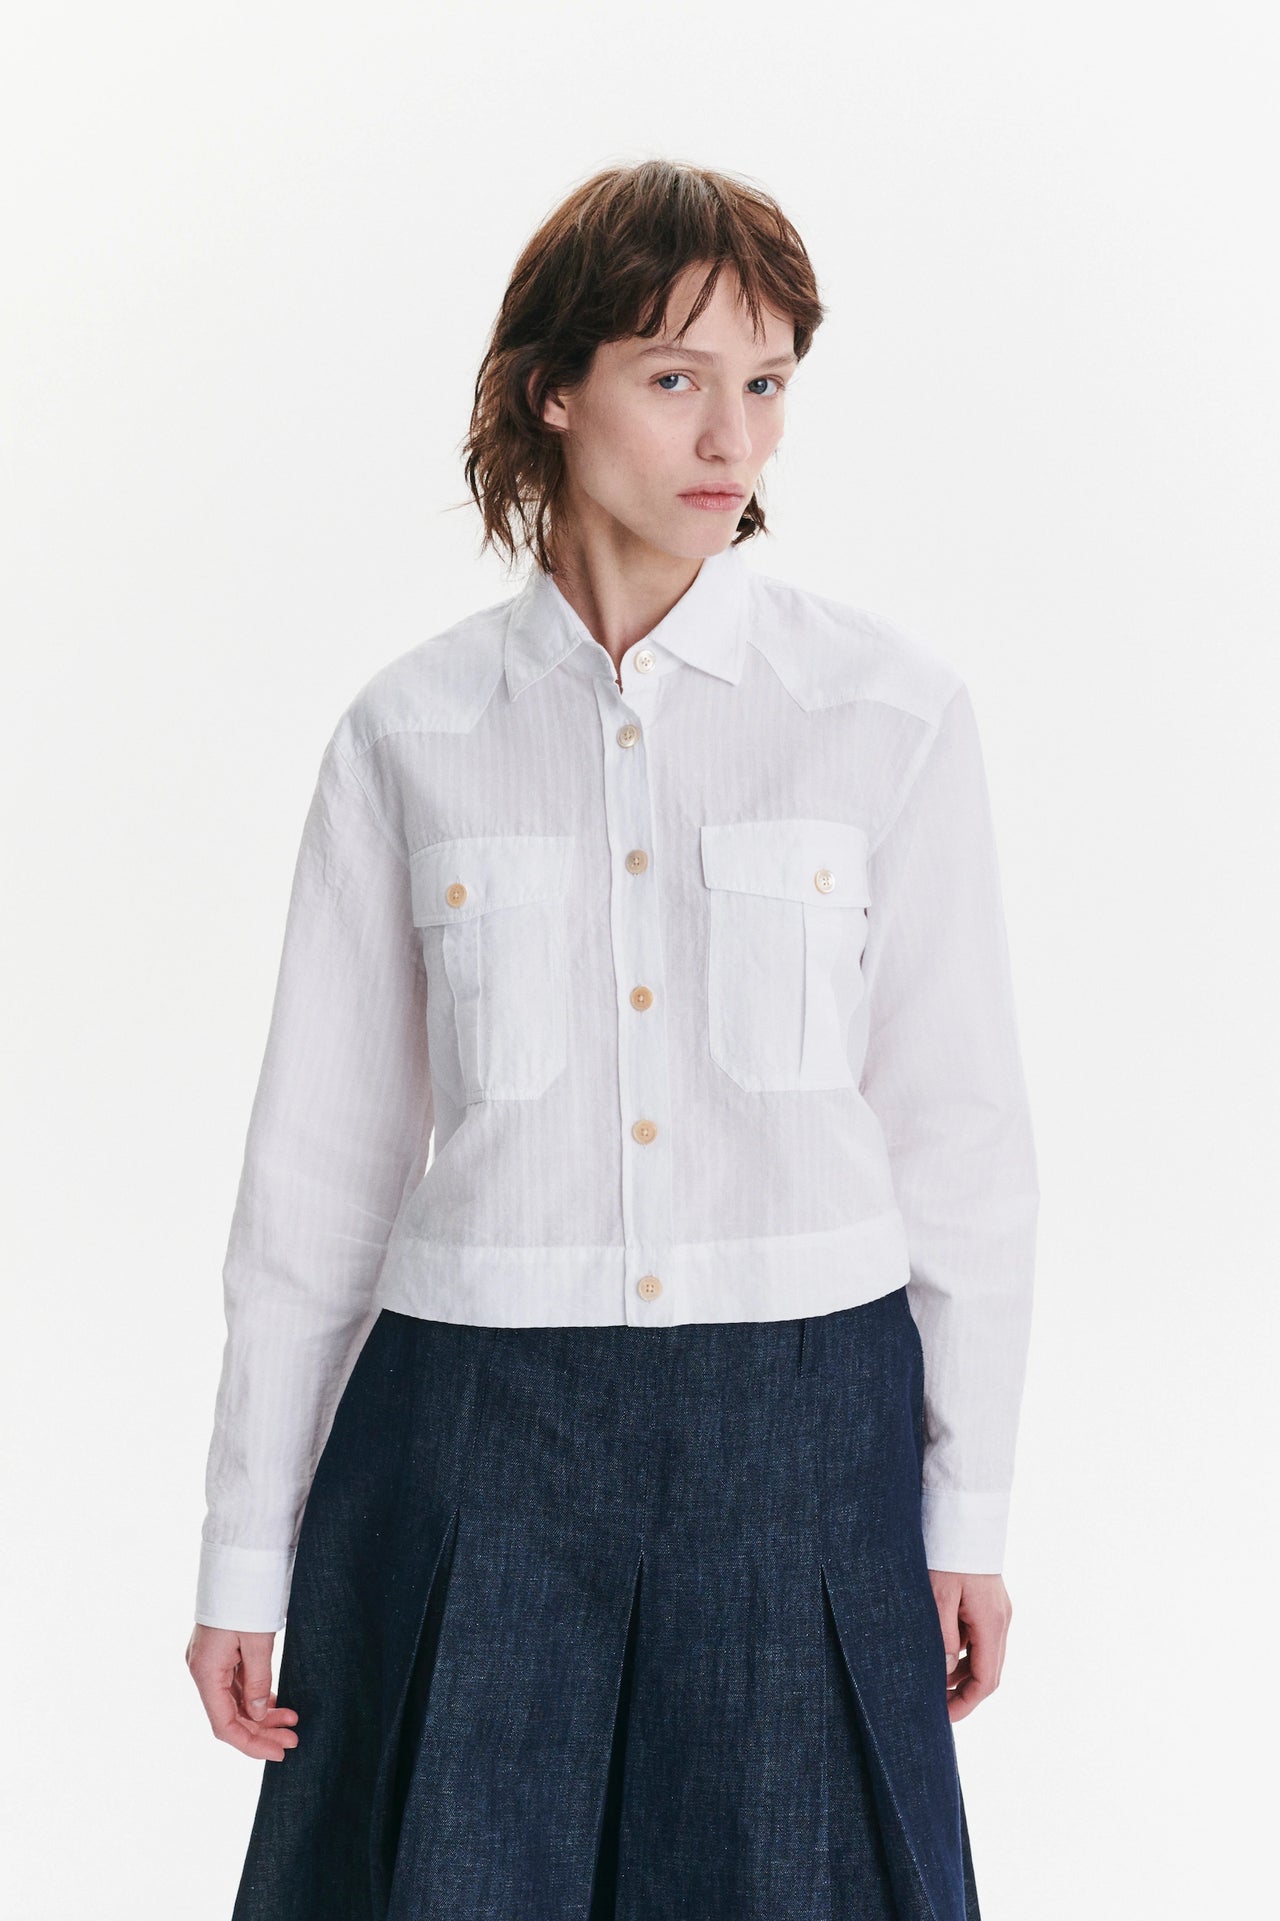 Shirt Jacket in a White Soft Portuguese Cotton and Linen Seersucker